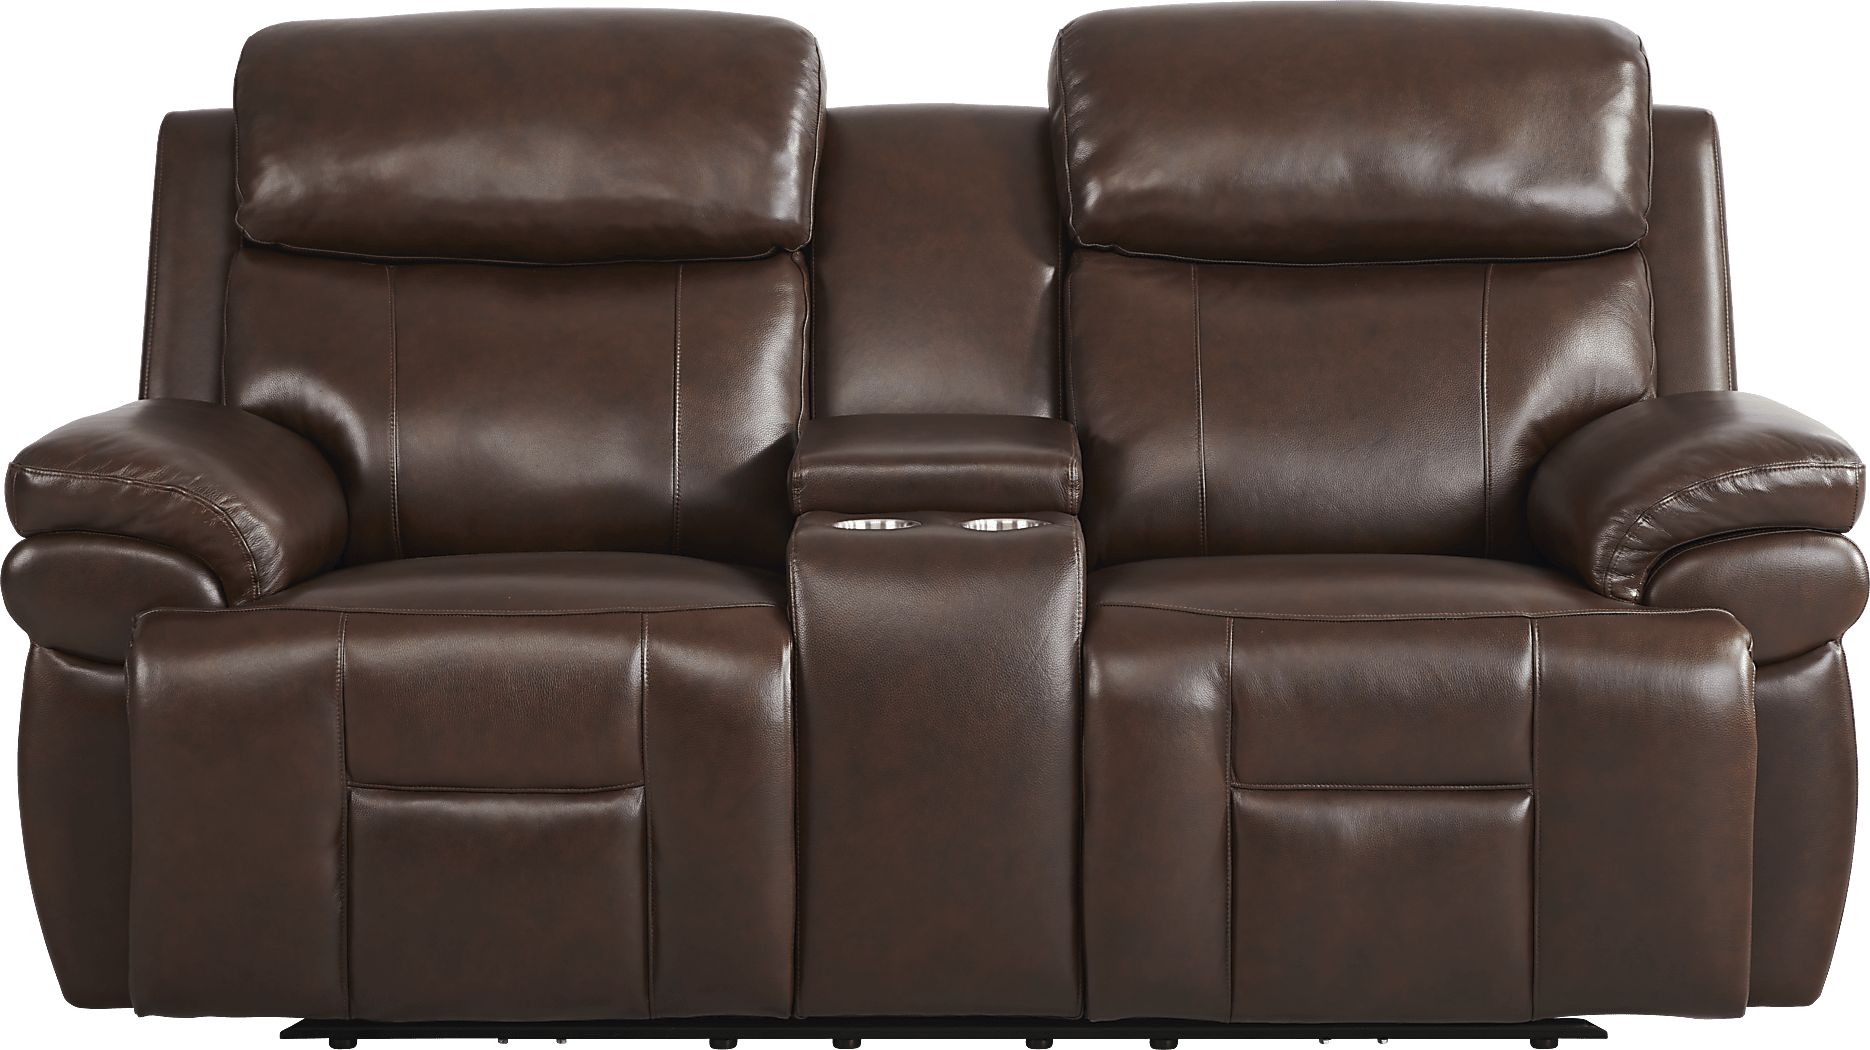 Eastmann Chocolate Leather 7 Pc Triple Power Reclining Living Room with Air Massage